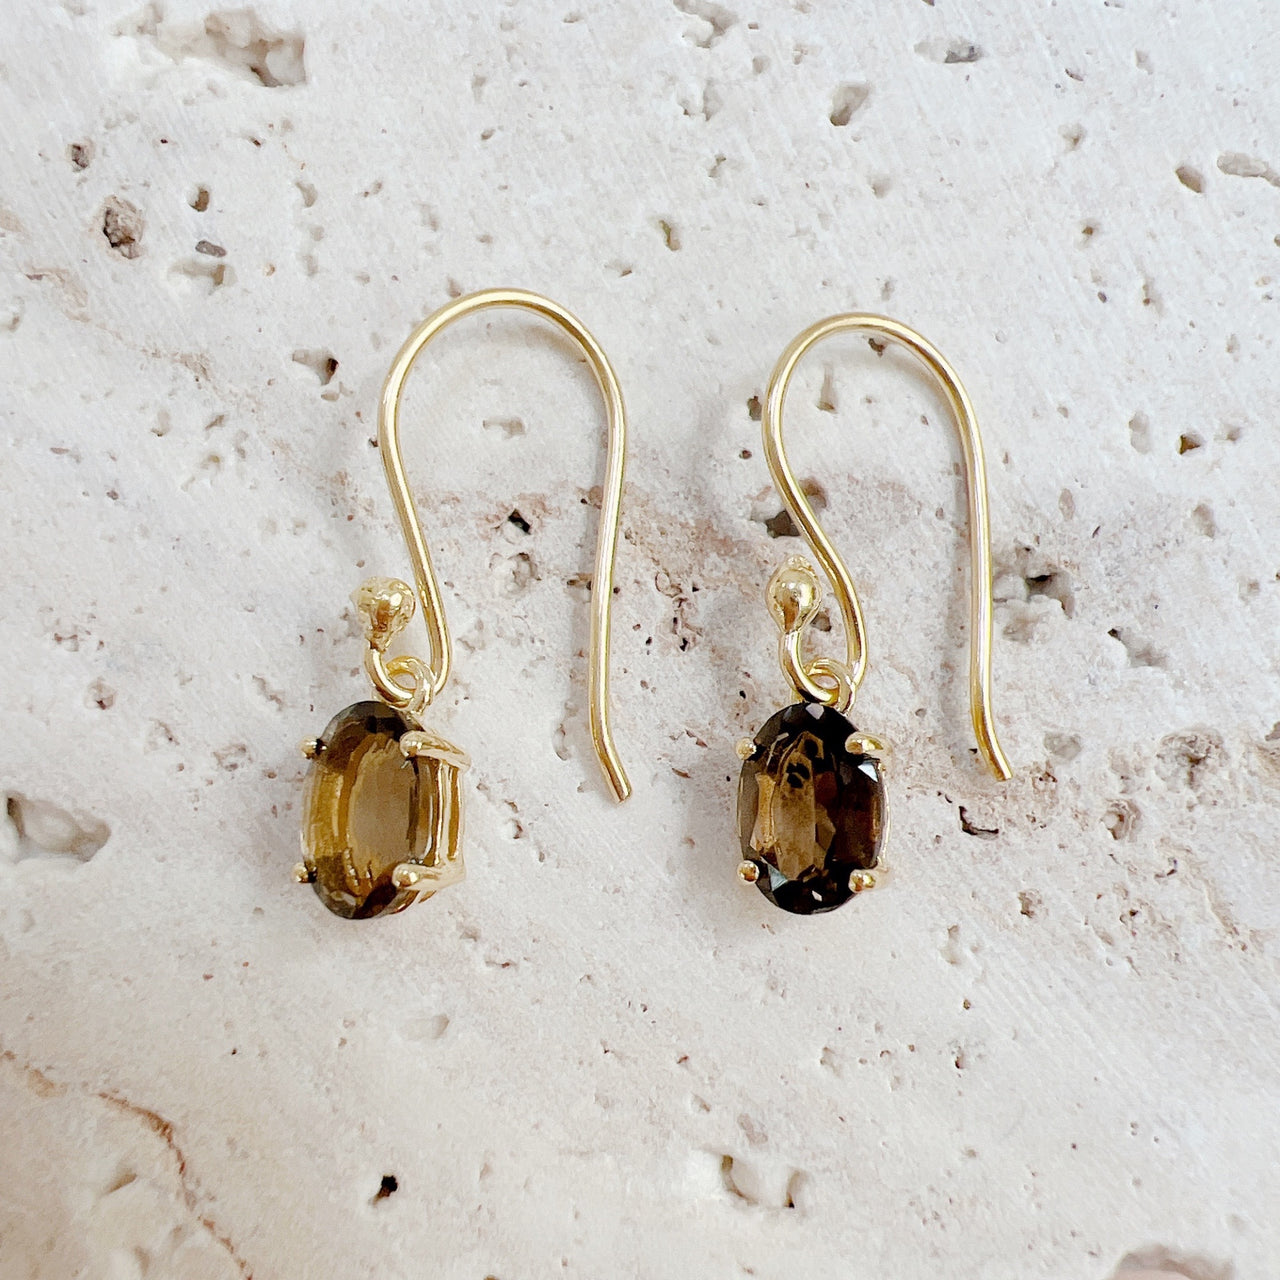 Vermeil Smoky Topaz Earrings with 24K Gold Accents